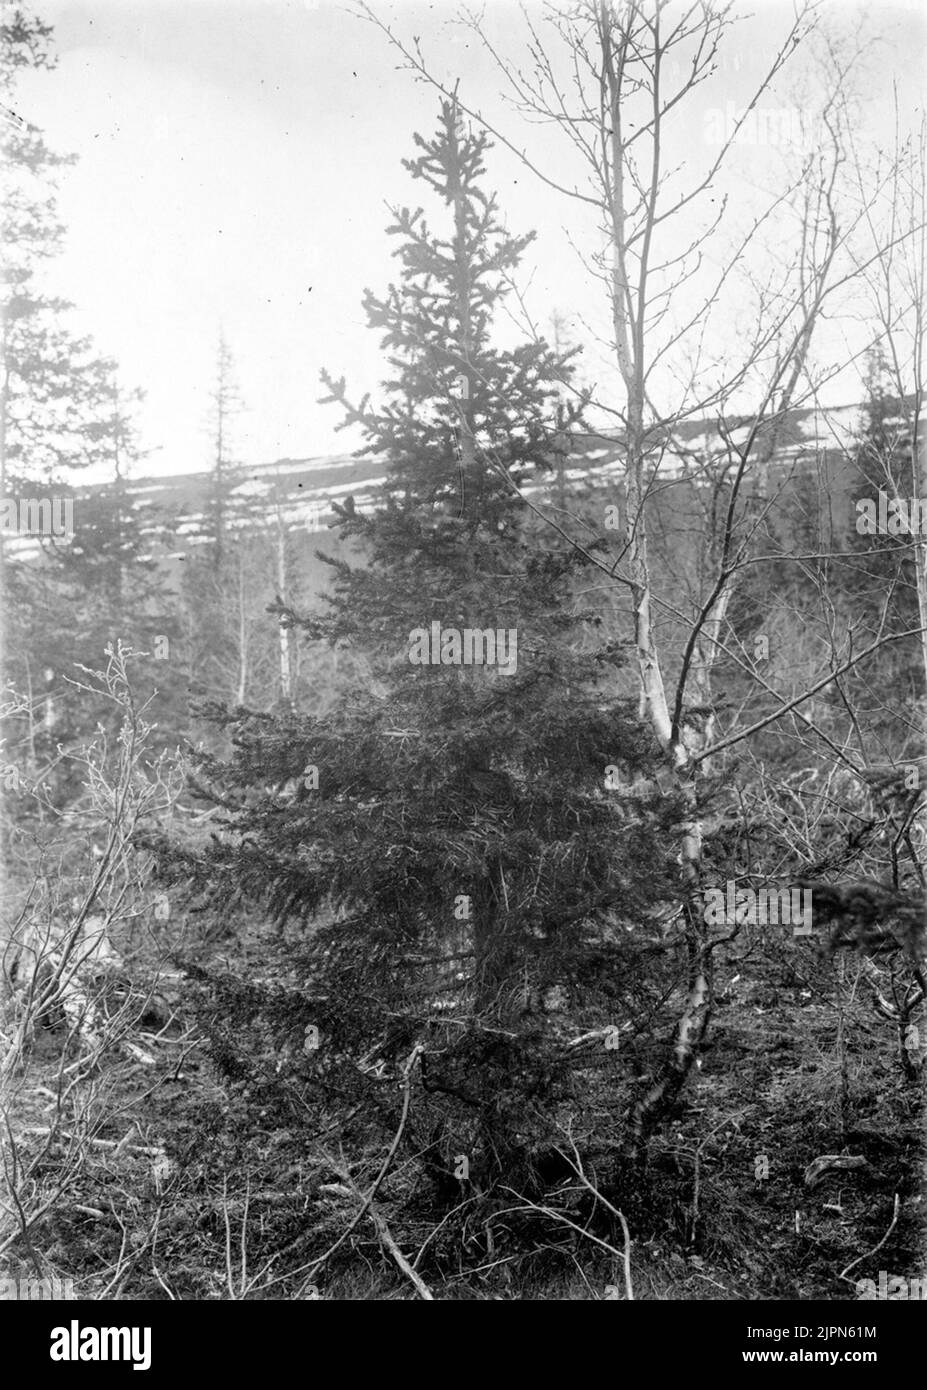 Residence for red wingetrast, turdus iliacus, June 1912 Boplats för rödvingetrast, Turdus iliacus, juni 1912 Stock Photo